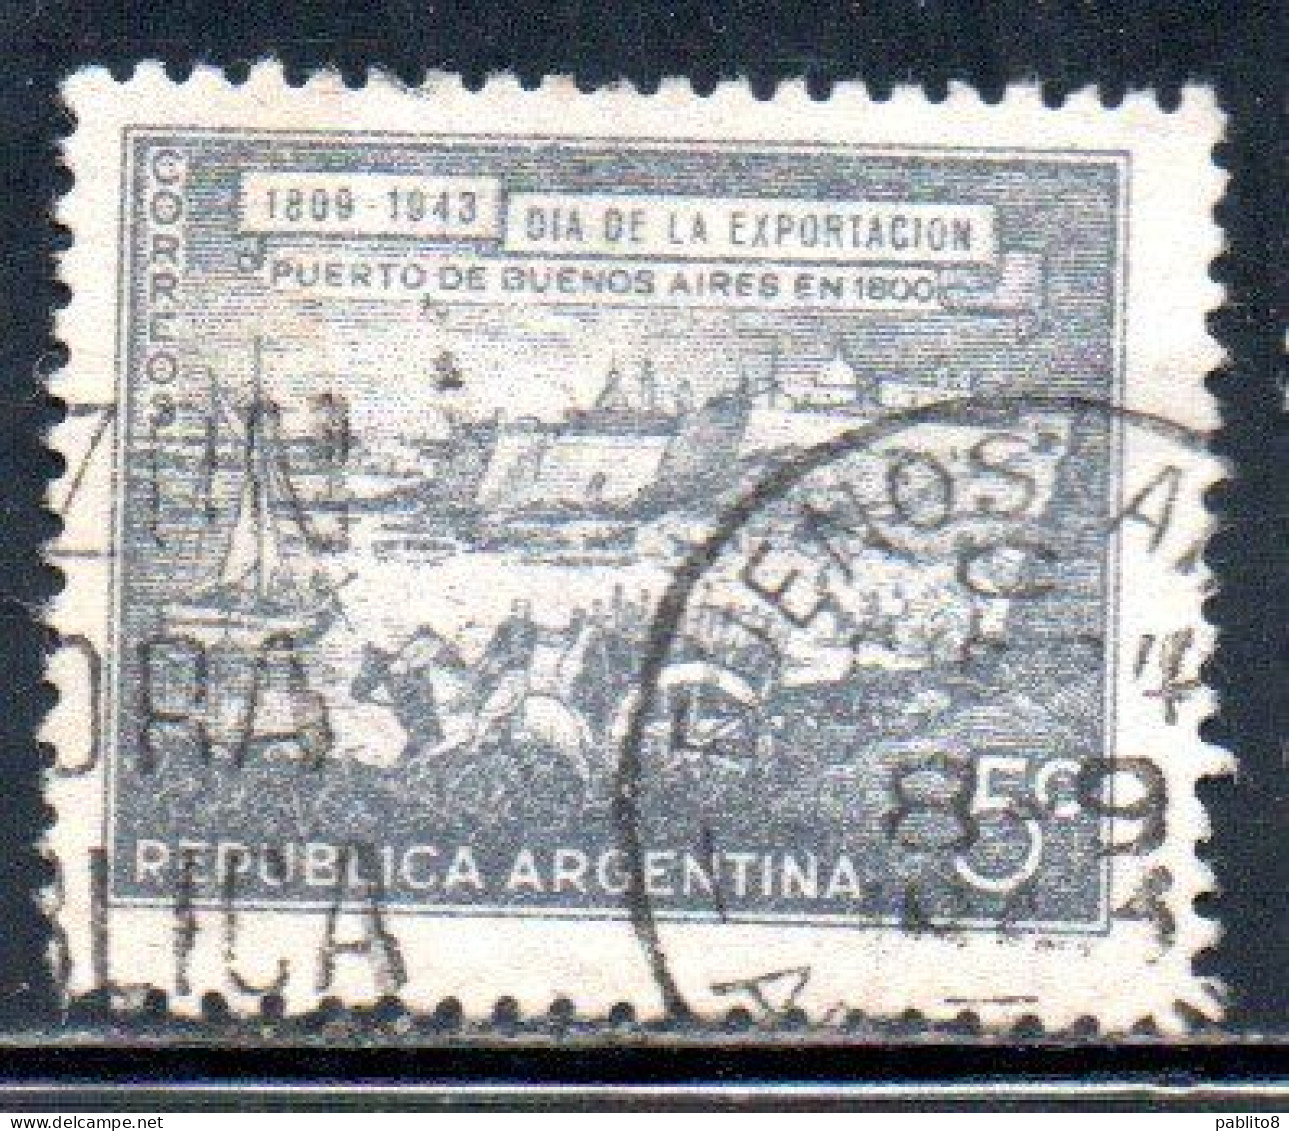 ARGENTINA 1943 DAY OF EXPORTS PORT OF BUENOS AIRES IN 1800  5c USED USADO OBLITERE' - Gebruikt